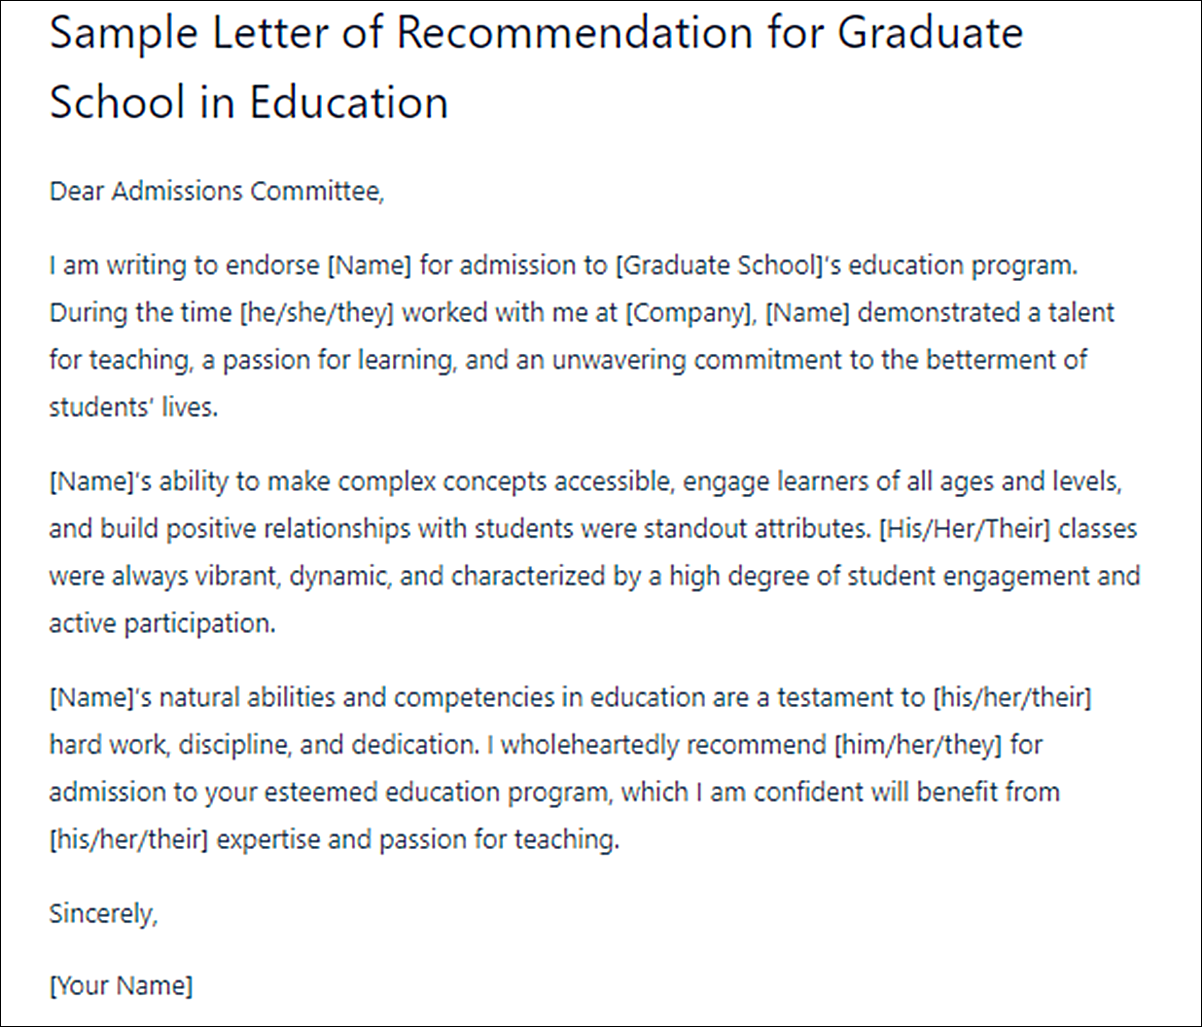 Letter of Recommendation Templates for Graduate School from Coworker